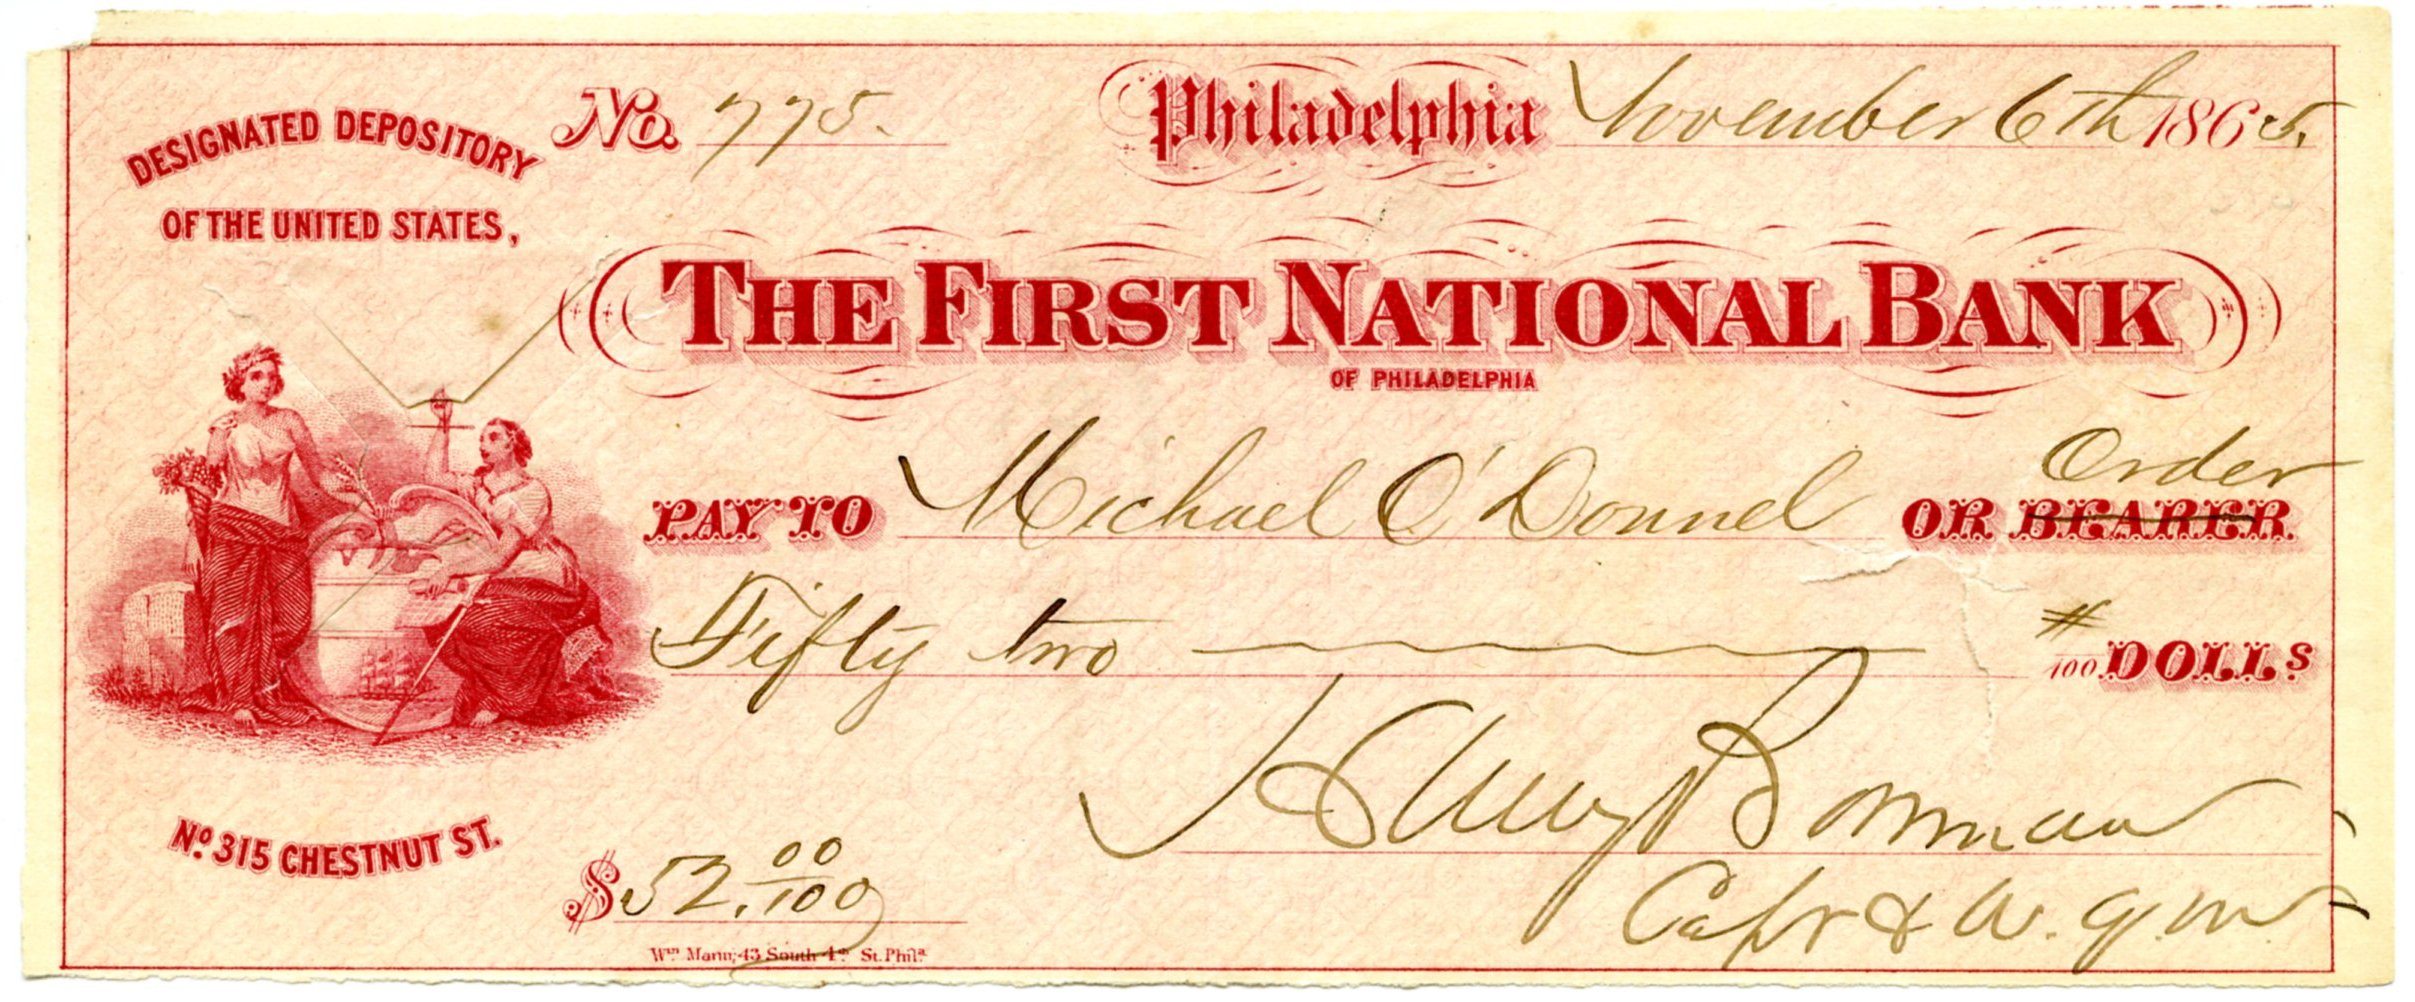 A tan check with red lettering from The First National Bank of Philadelphia. A red illustration of two women representing liberty and justice is on left margin of check.